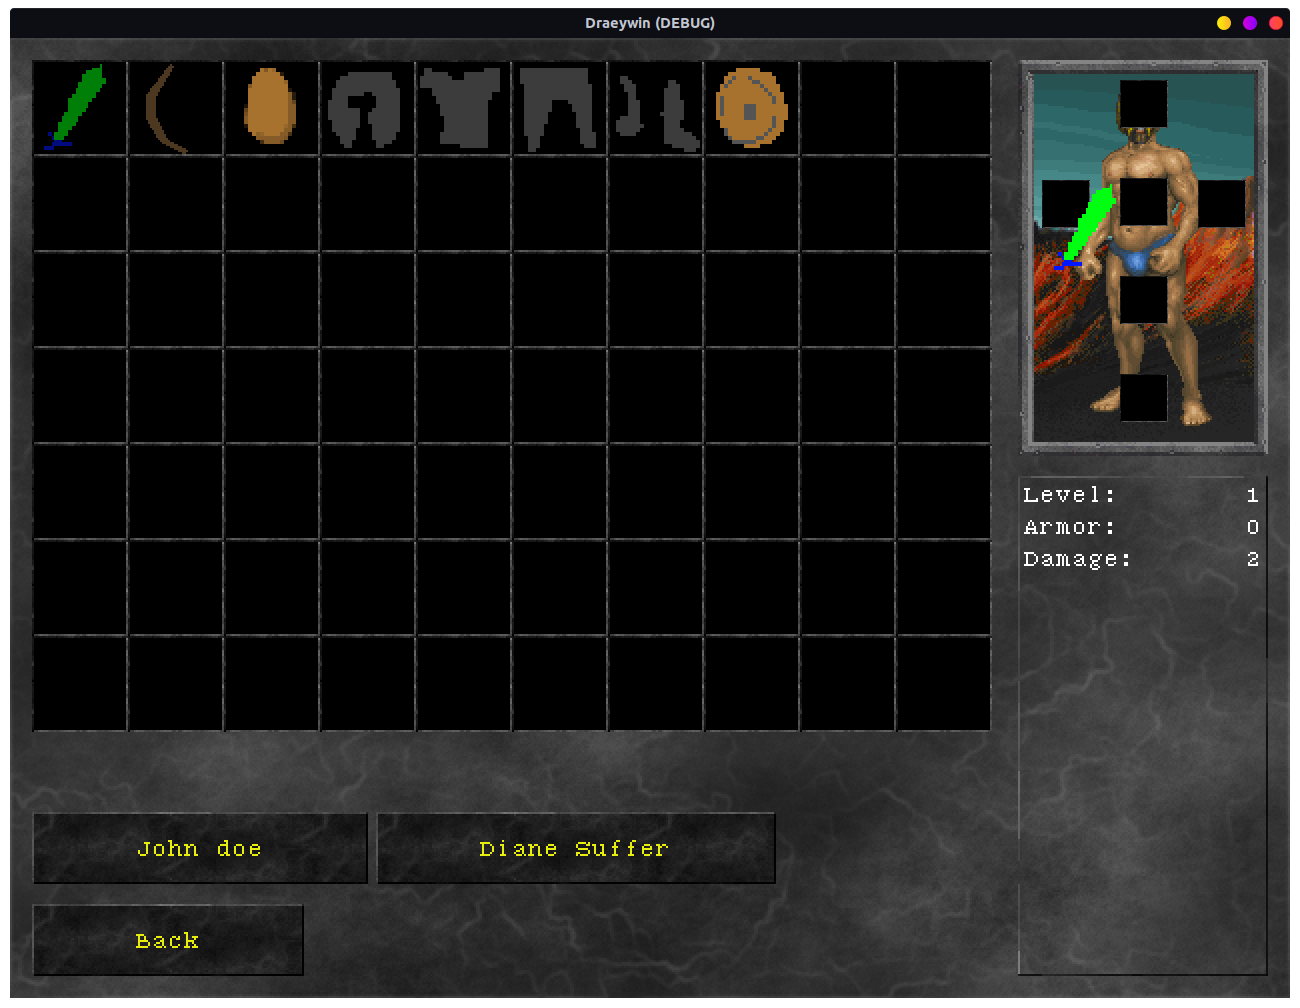 Screenshot of Draeywin showing the player inventory screen